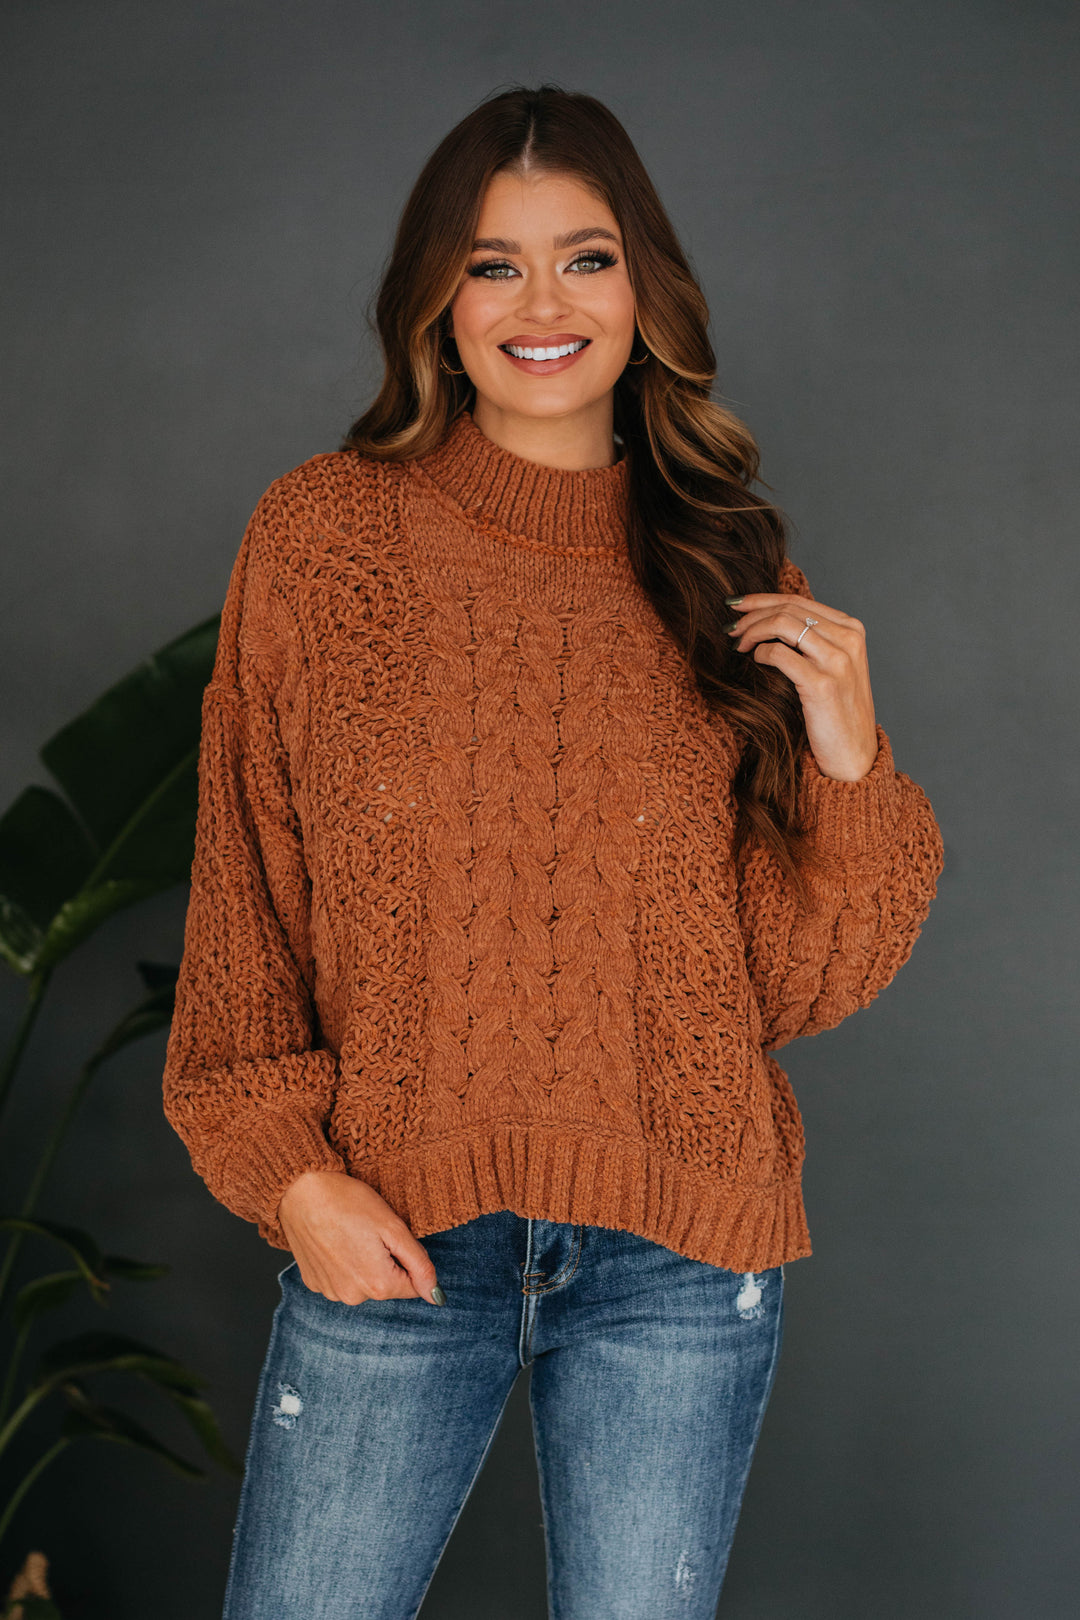 Stassie Cable Knit Sweater - Camel